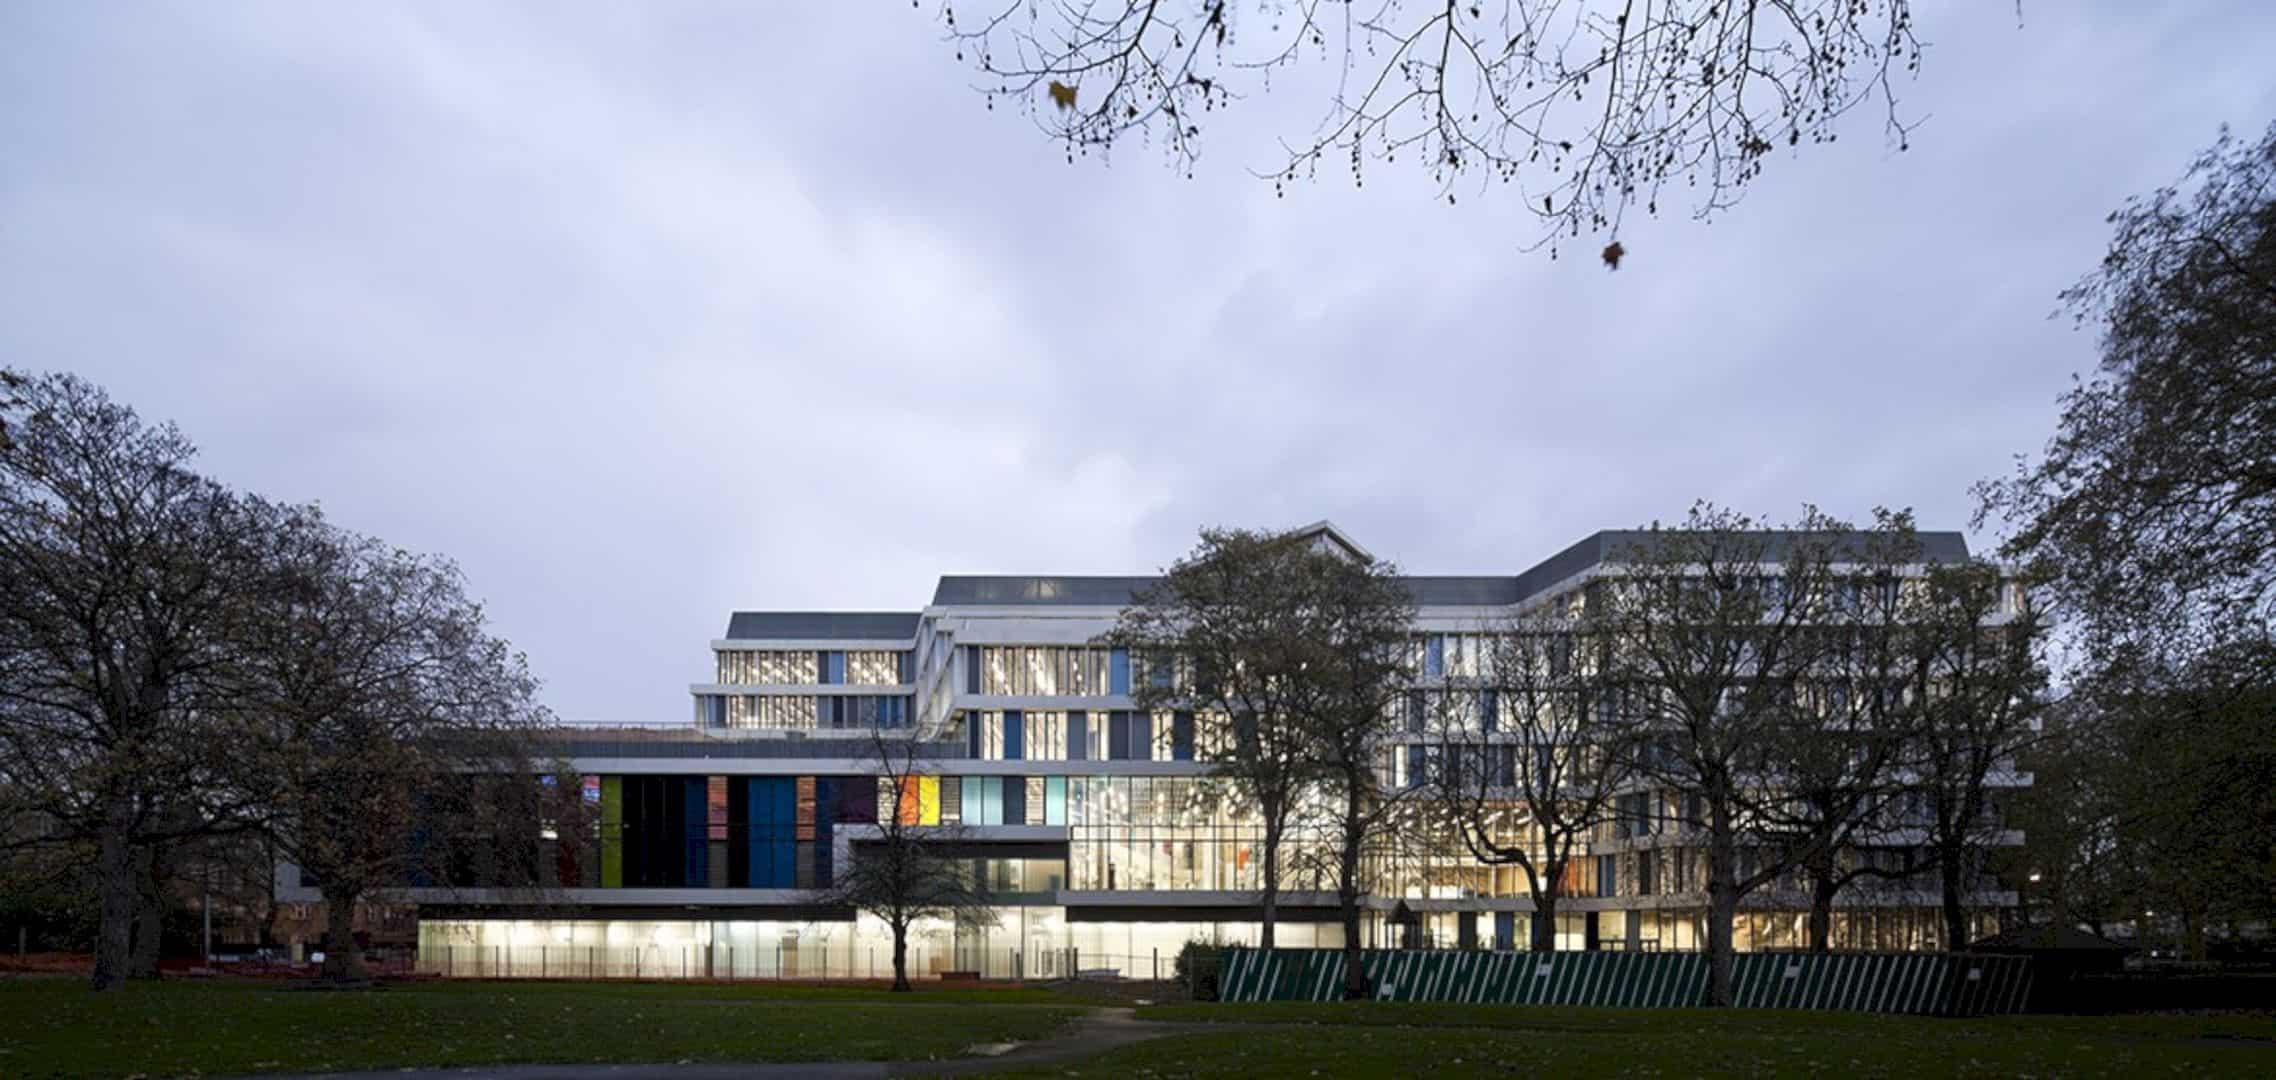 City Of Westminster College The Building To Support The New Ways Of Teaching And Learning 12